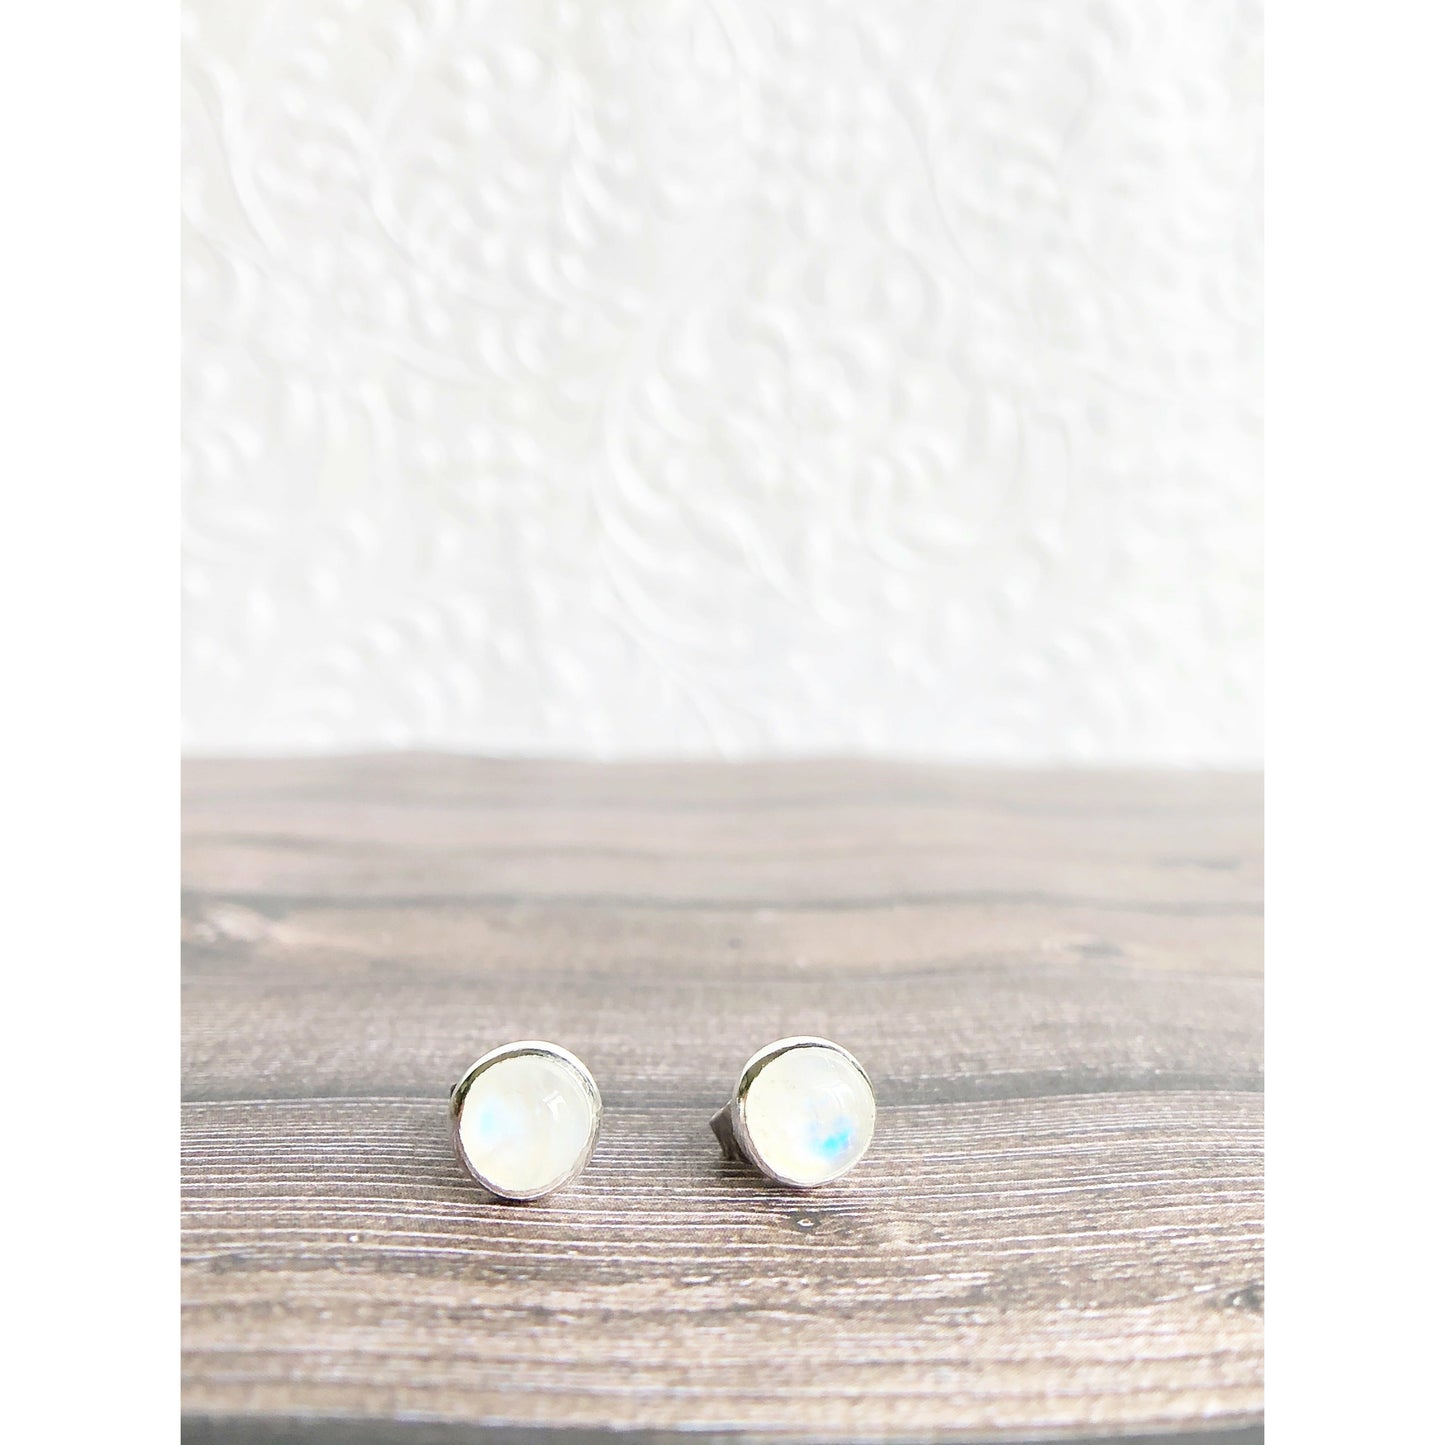 Simple moonstone (clear with blue lines) sterling silver bezel earrings